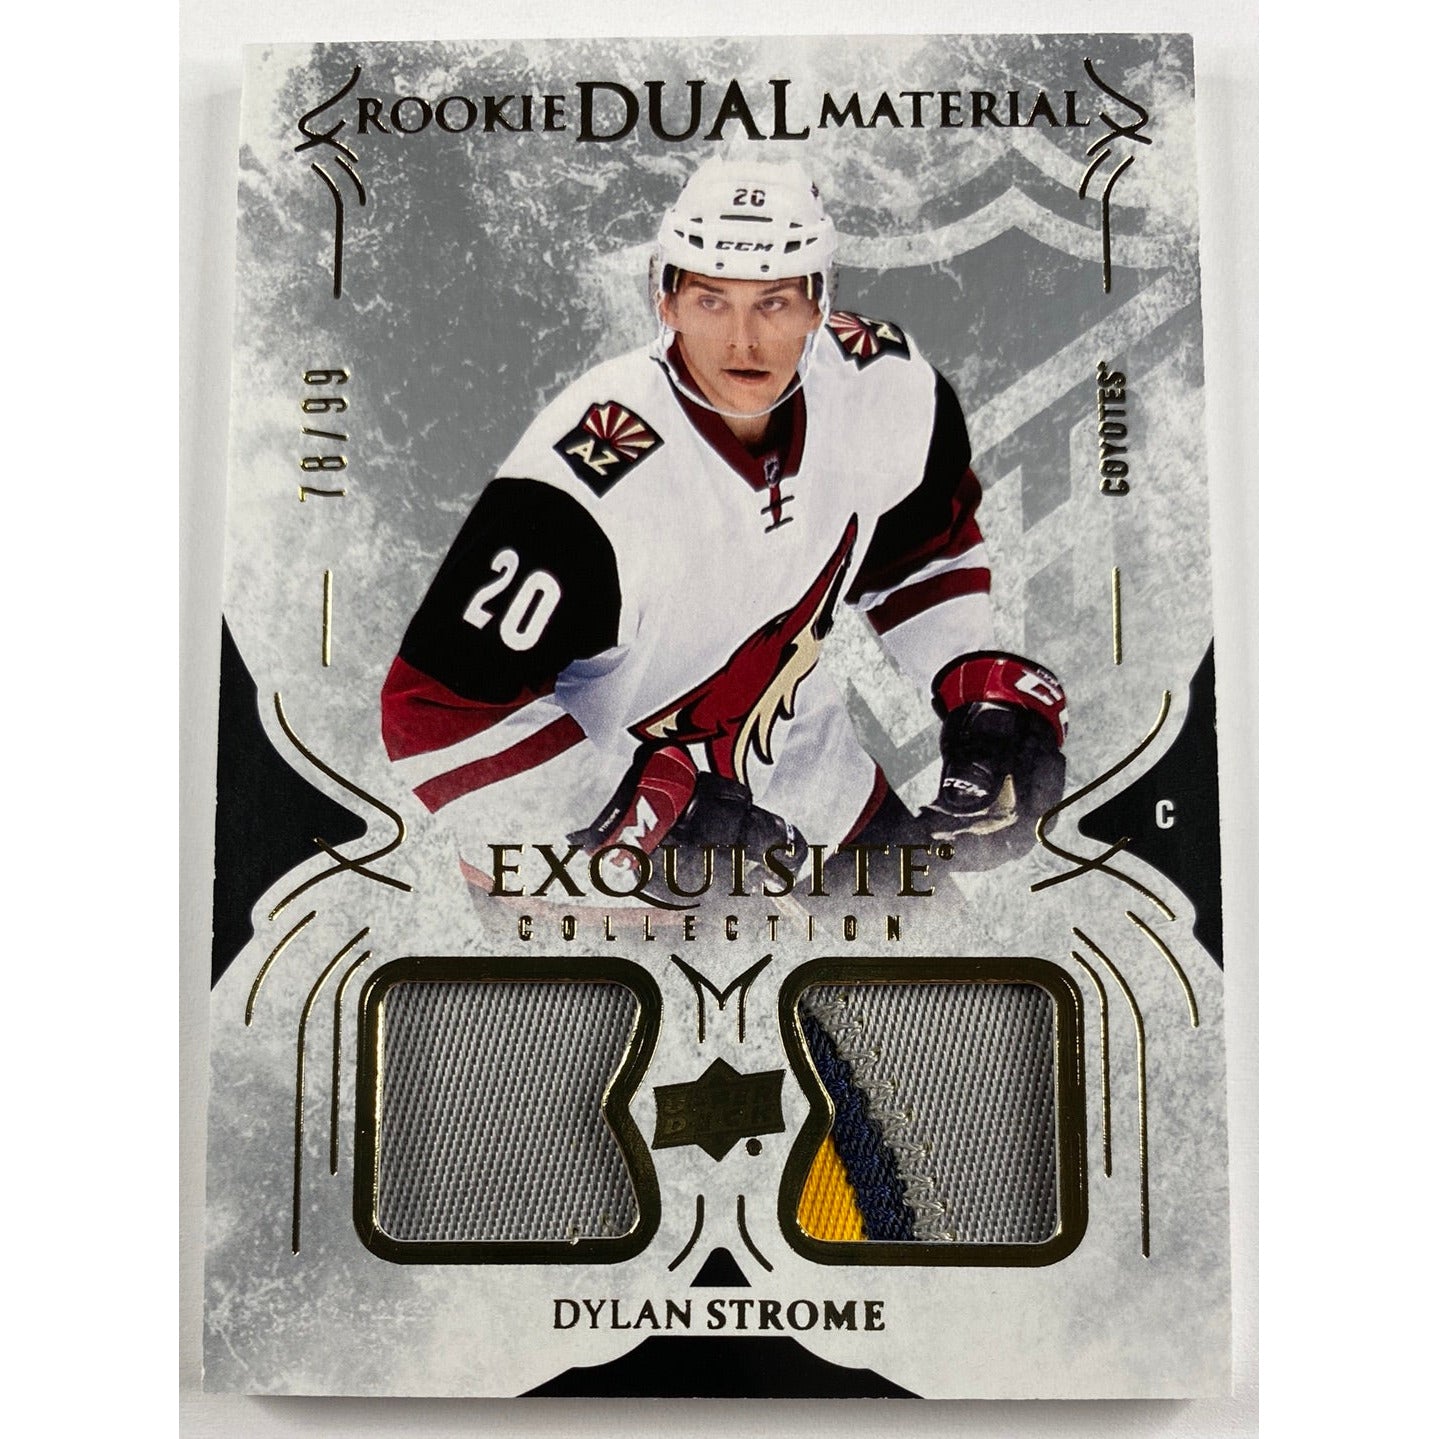 2016-17 Exquisite Collection Dylan Strome Rookie Dual Material /99